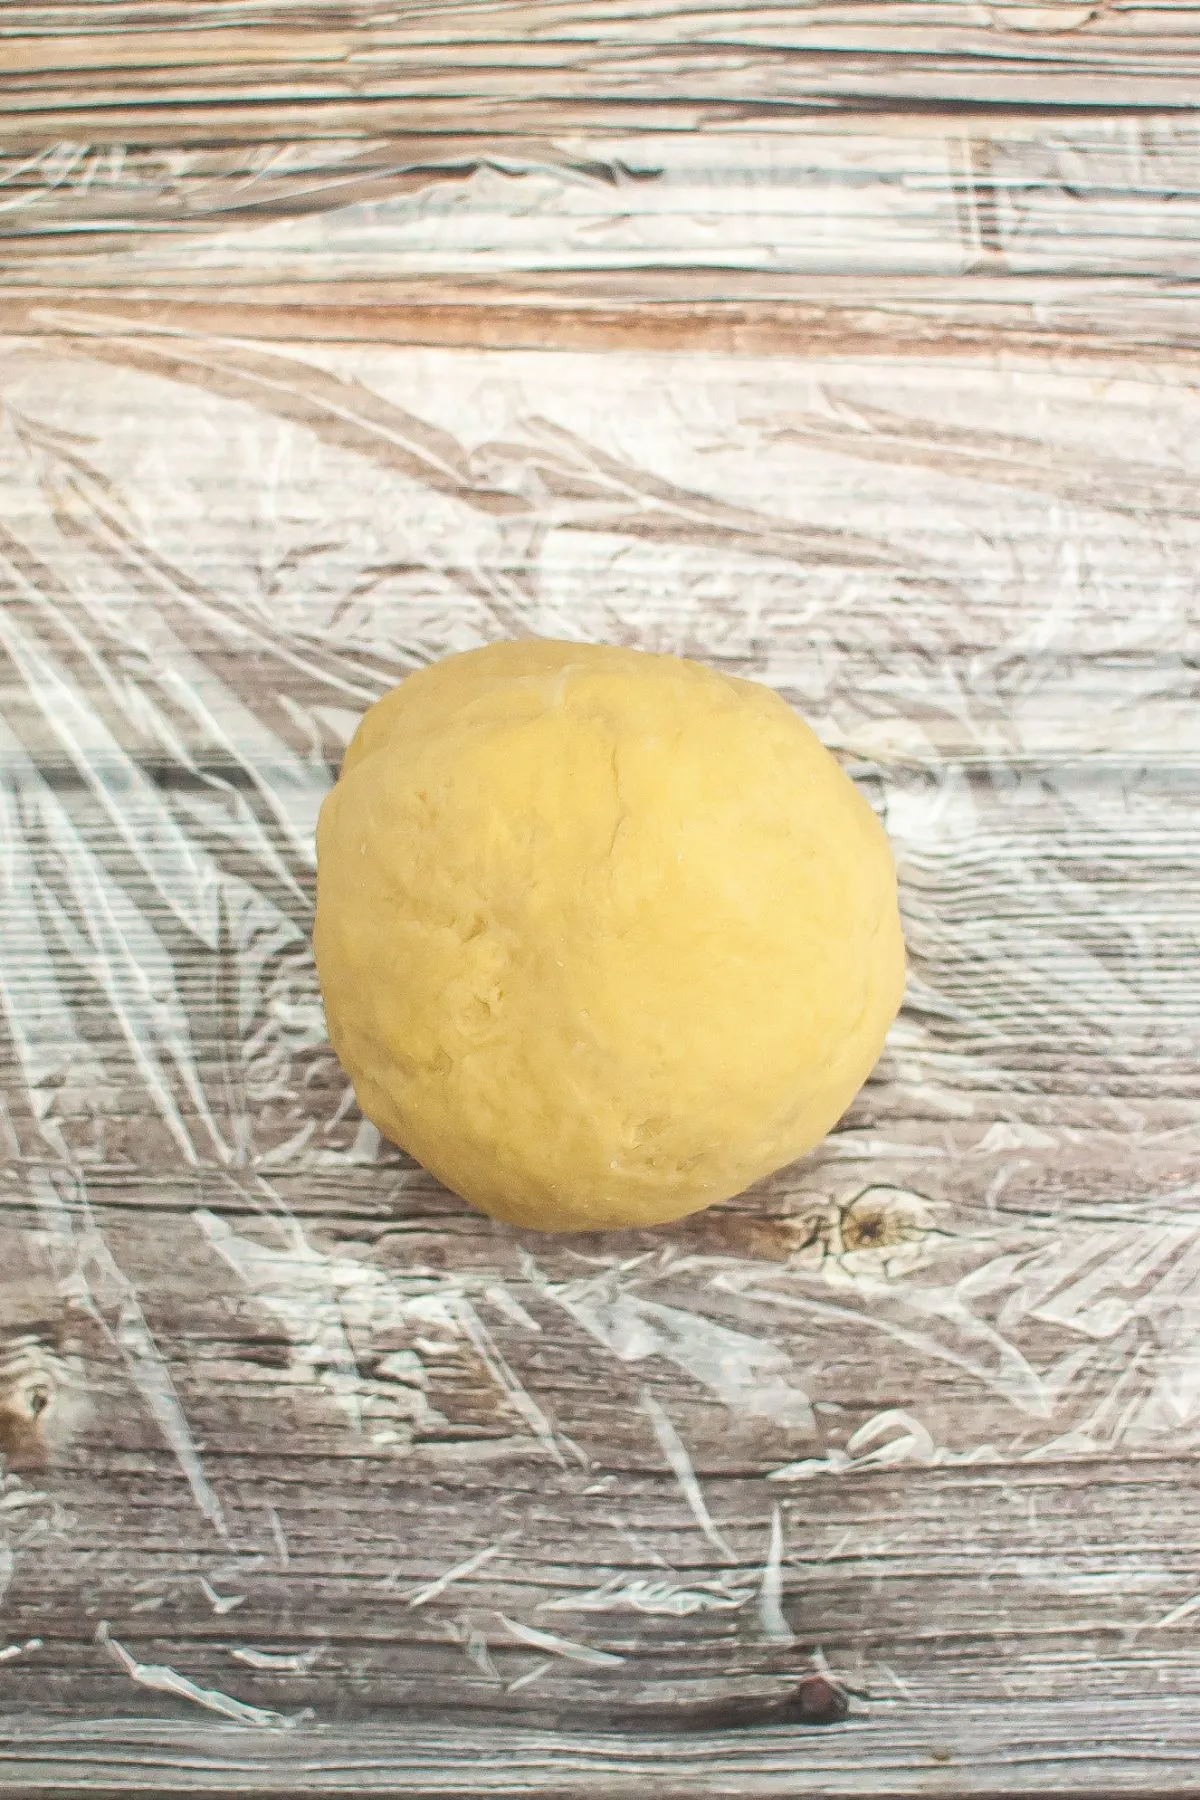 A ball of pasta dough sitting on plastic wrap.